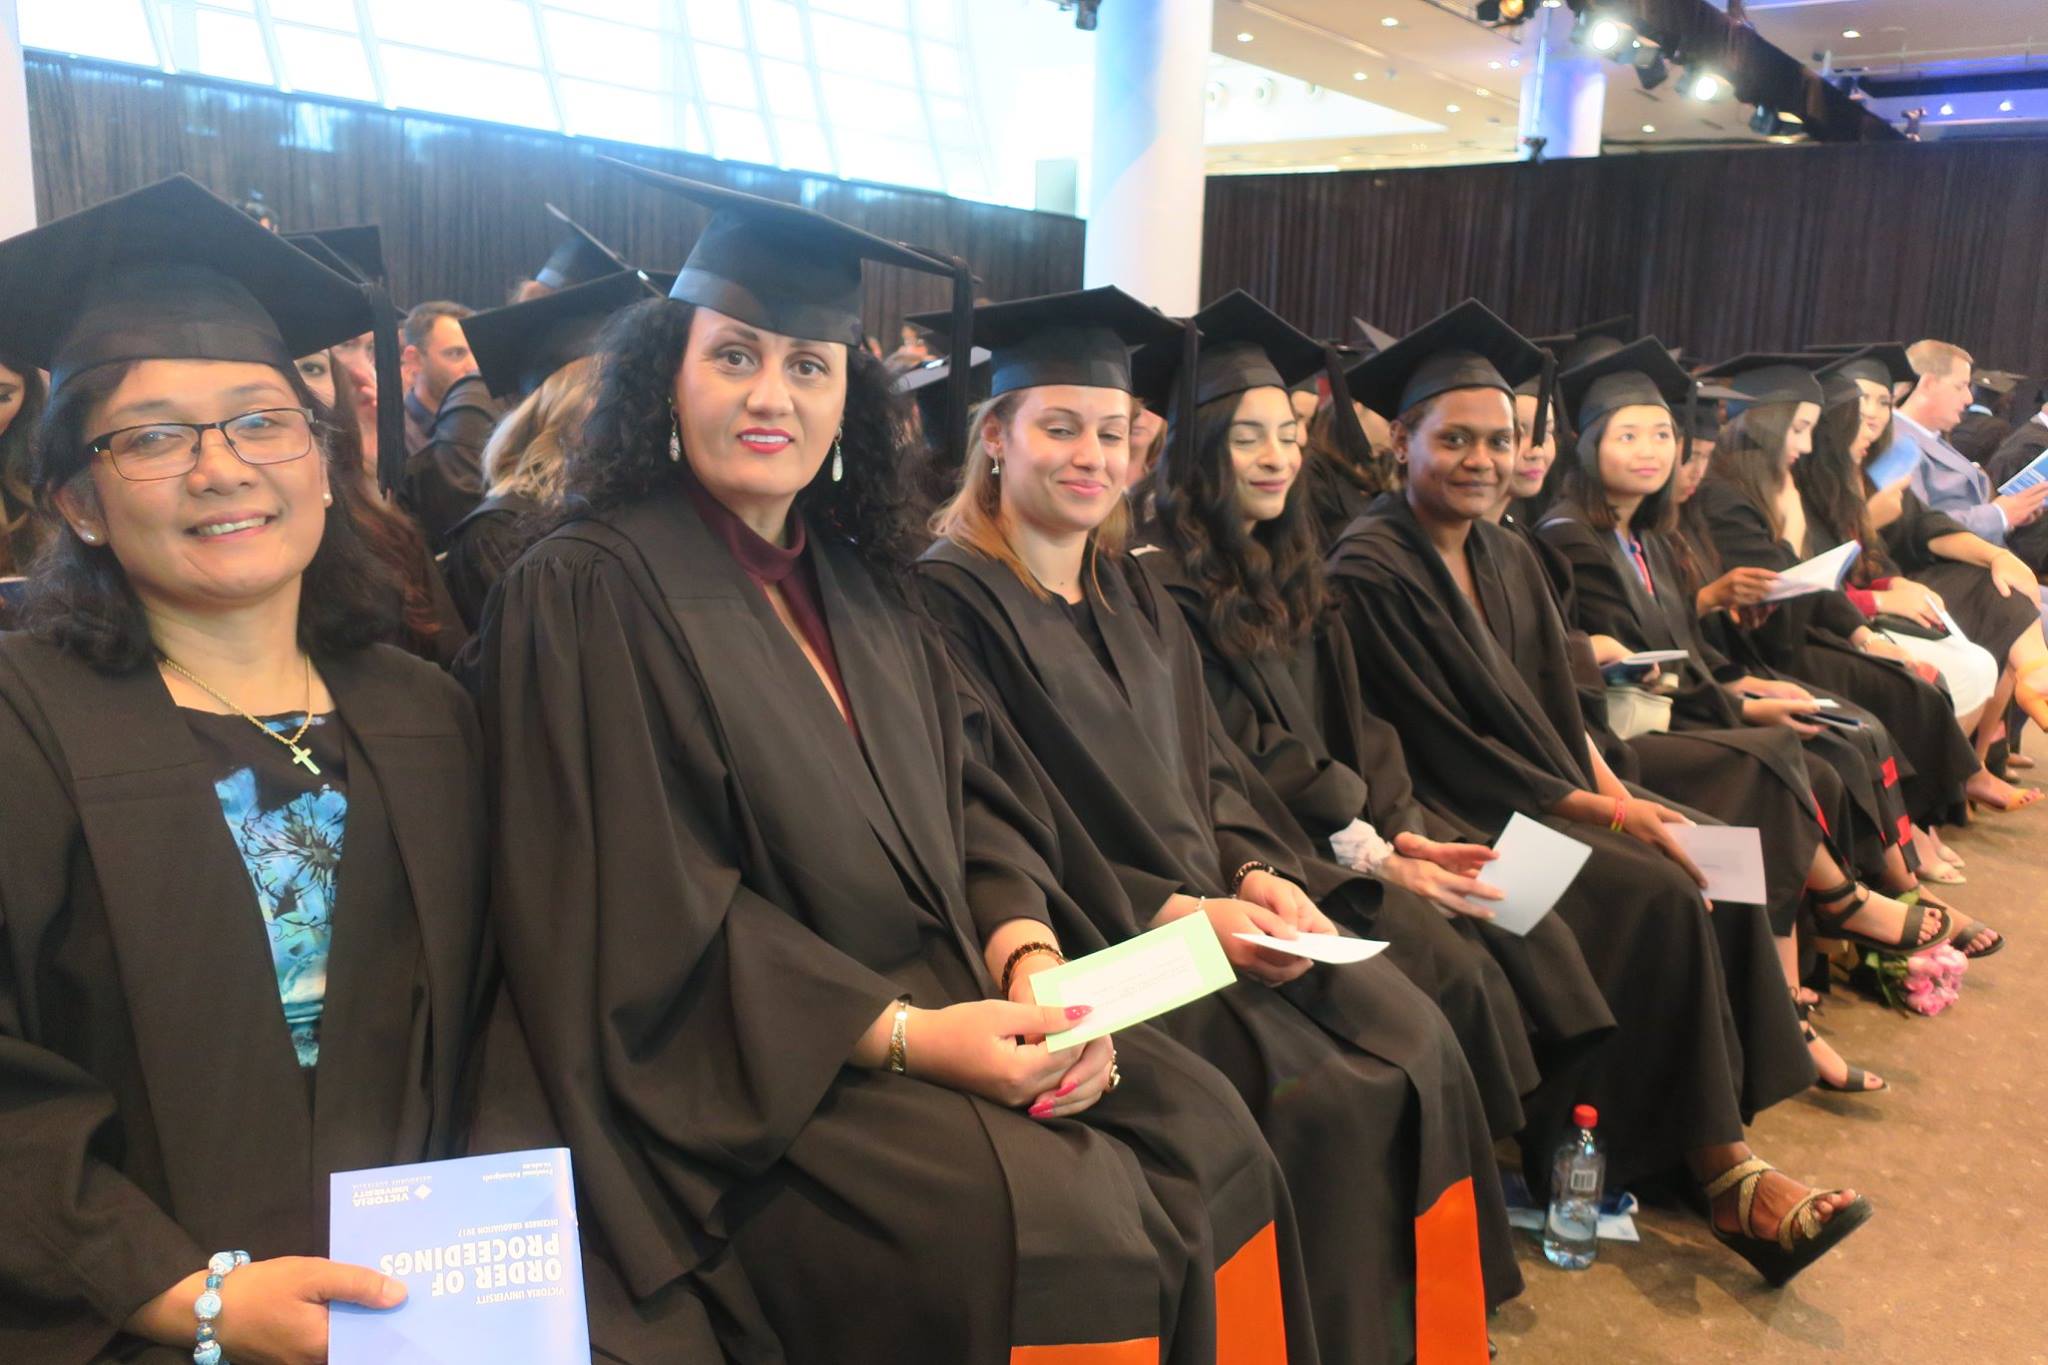  VU Poly graduates seated at their ceremony